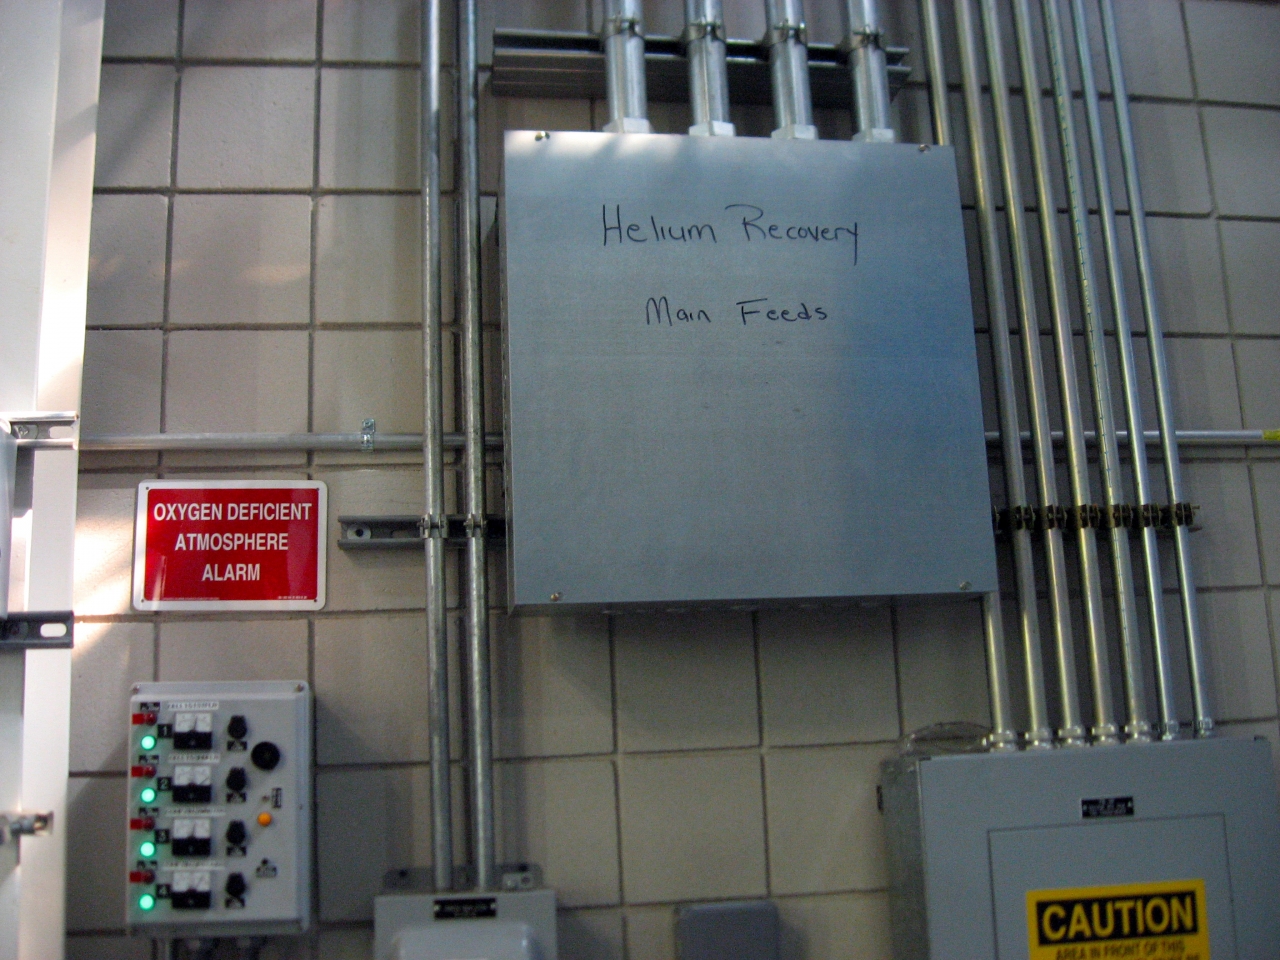 Helium recovery main feeds and oxygen deficient atmosphere alarm controls in the DC Field wing test cell corridor.